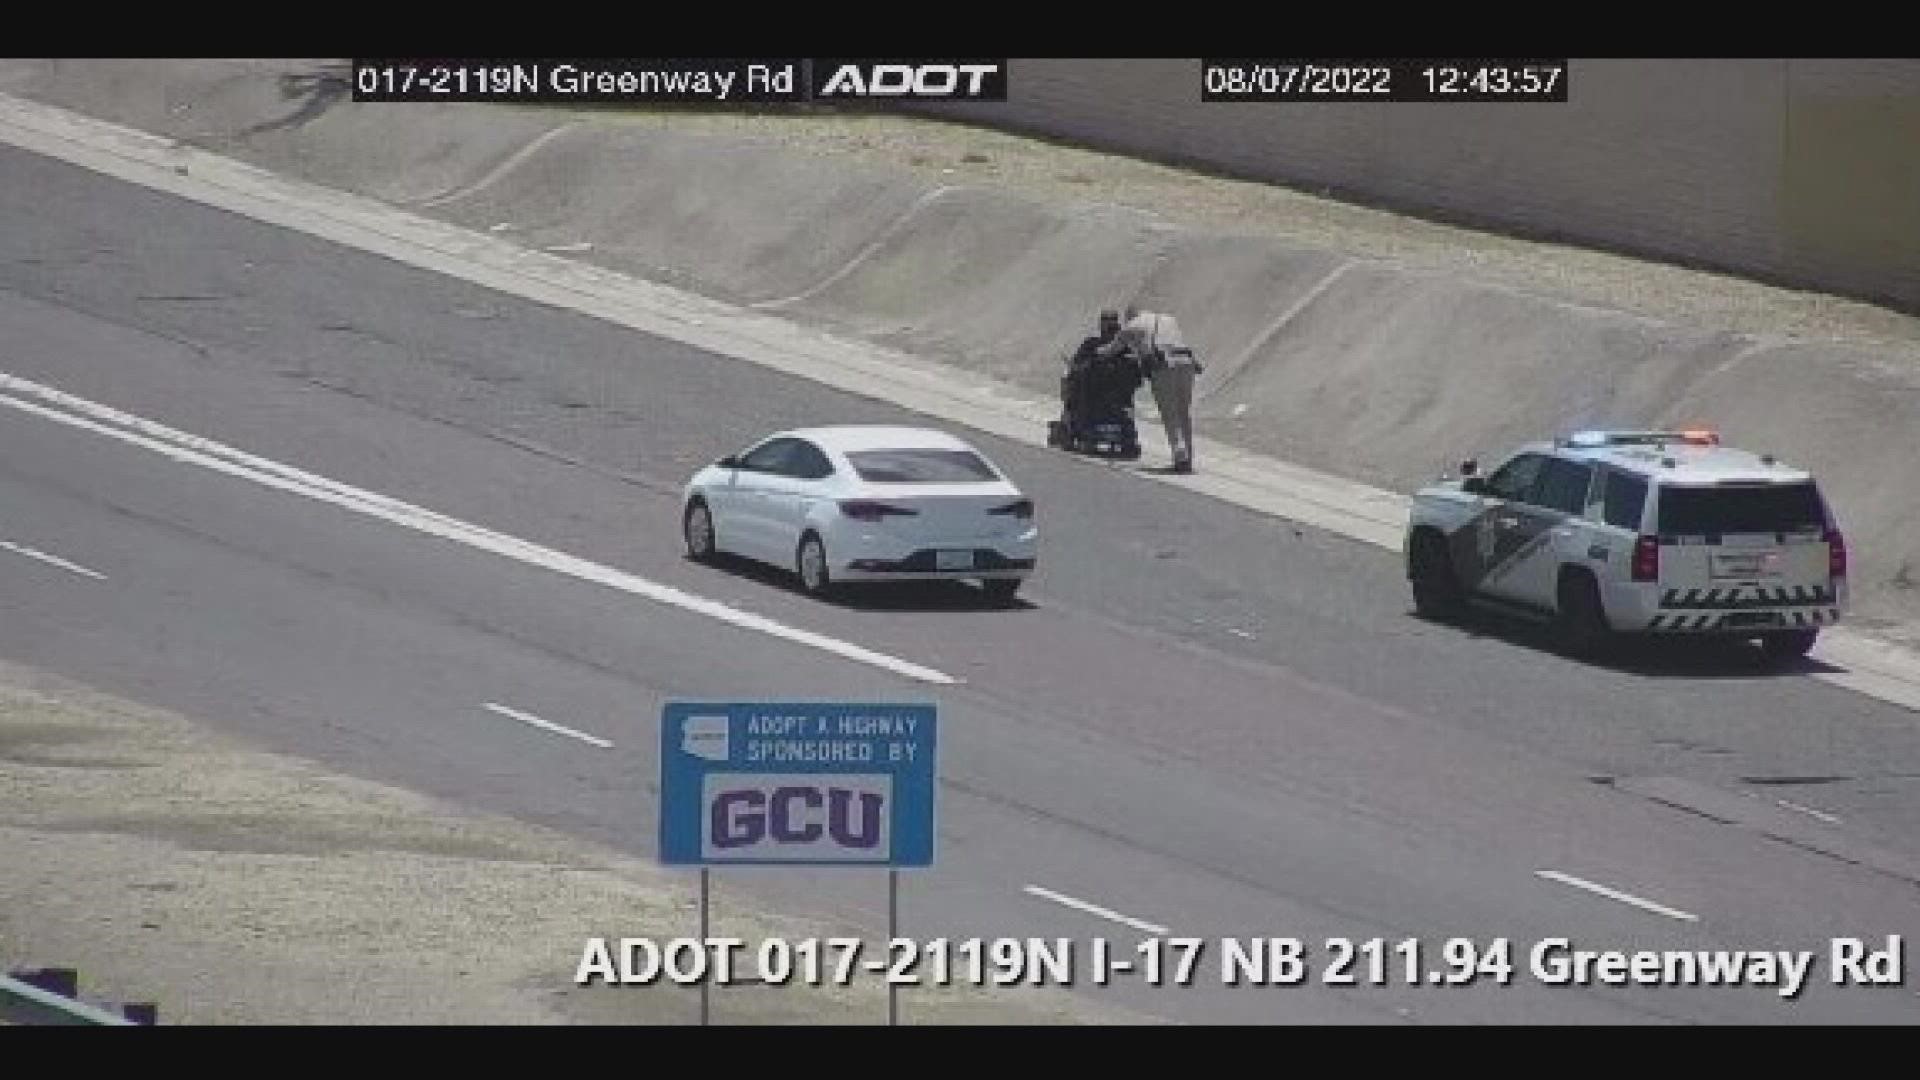 An Arizona DPS trooper was seen assisting a man in a scooter get off the highway on I-17 in north Phoenix. He reportedly helped push the scooter to the man's home.